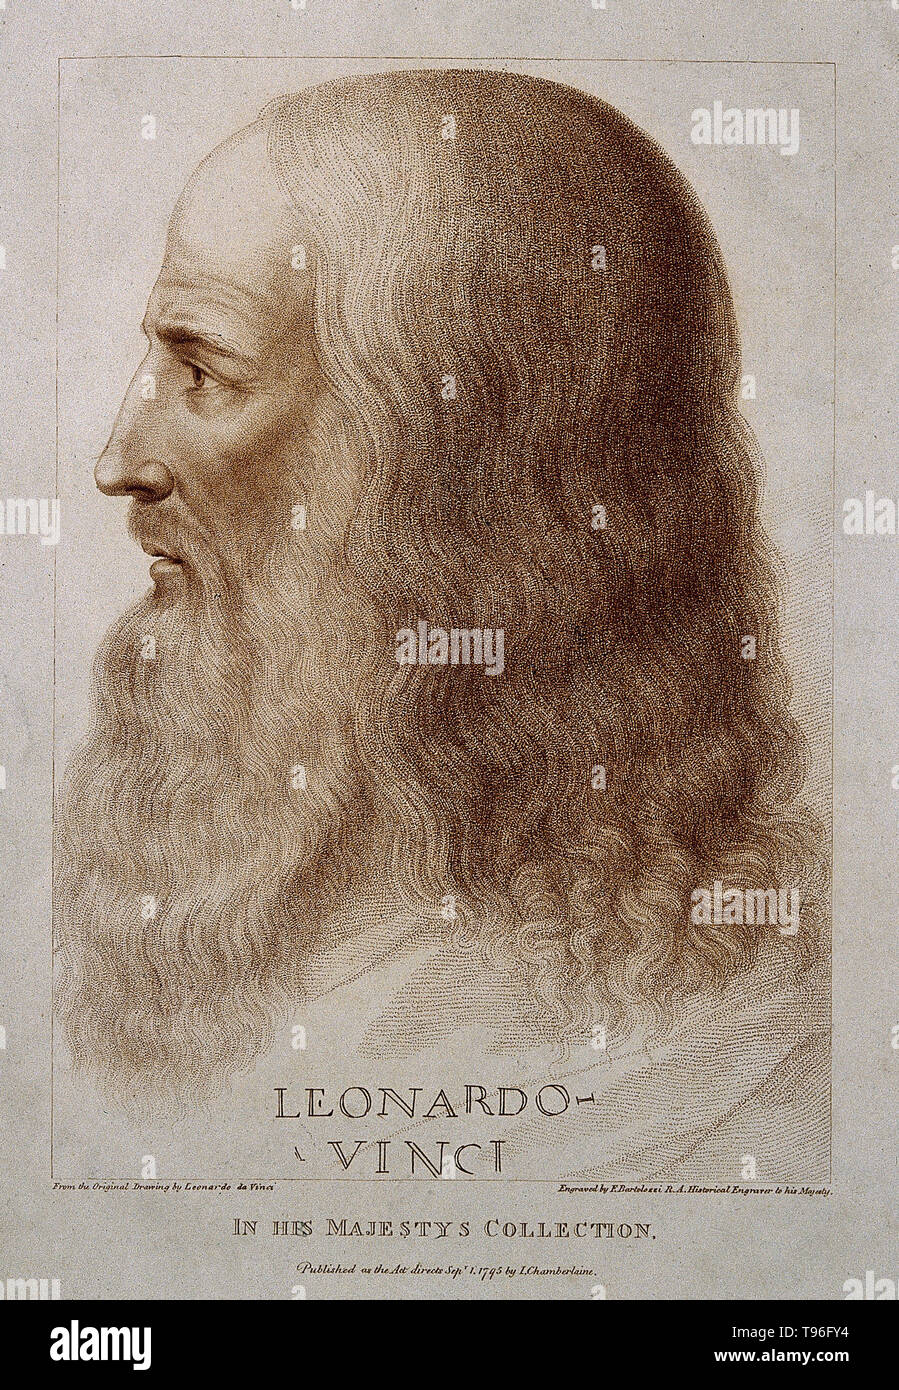 Leonardo di ser Piero da Vinci (April 15, 1452 - May 2, 1519) was an Italian Renaissance polymath: painter, sculptor, architect, musician, mathematician, engineer, inventor, anatomist, geologist, cartographer, botanist, and writer. His genius, perhaps more than that of any other figure, epitomized the Renaissance humanist ideal, often been described as the archetype of the Renaissance Man.  Line engraving by Francesco Bartolozzi, 1795, after the sitter. Stock Photo